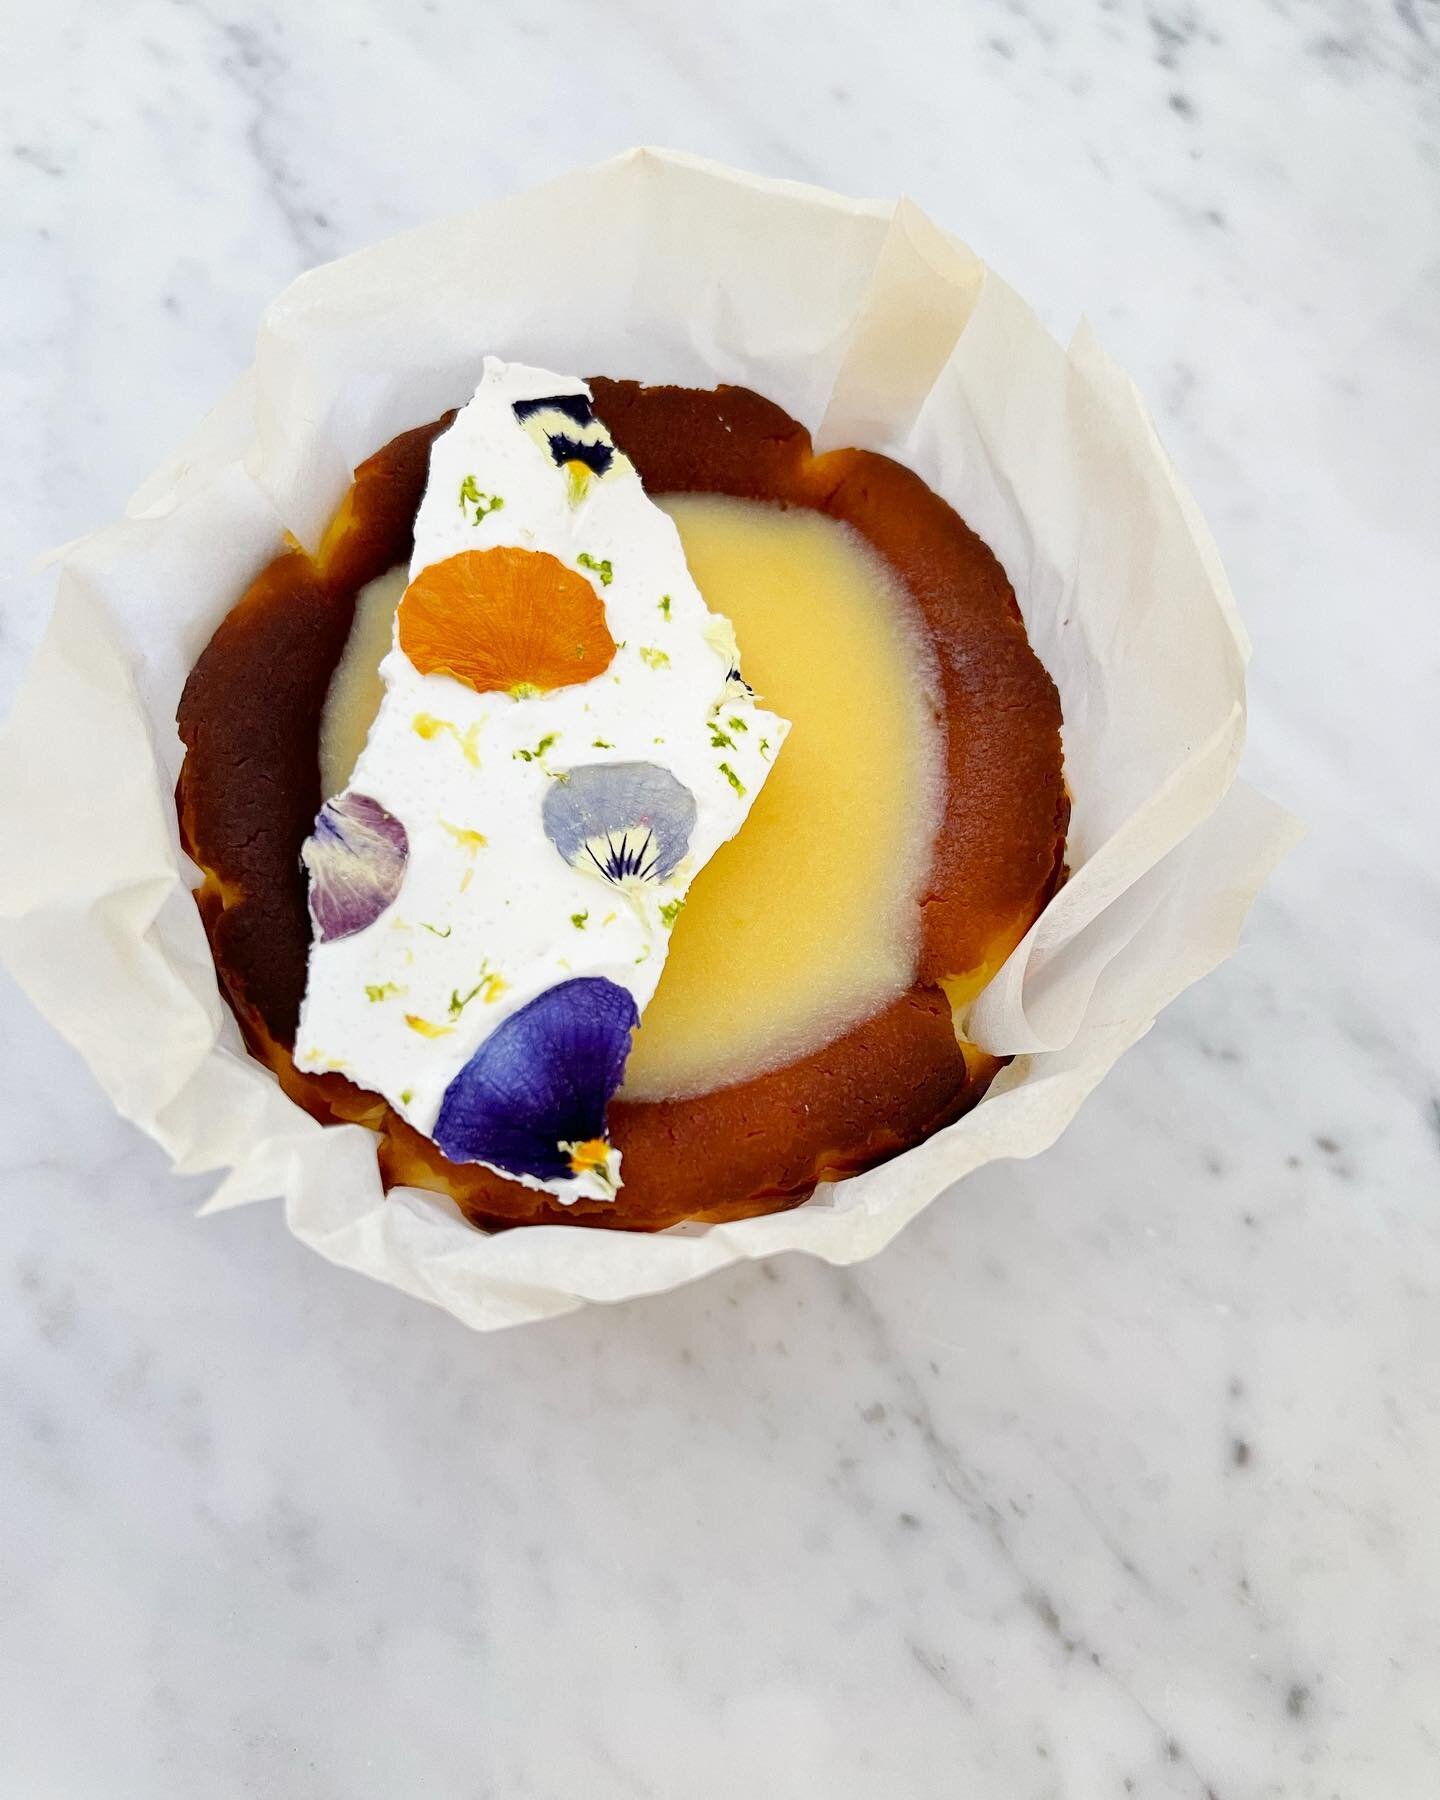 Burnt Basque cheesecake with lemon curd and floral meringue shard.

Just one of 4 beautiful desserts curated and handcrafted by a pastry chef for our Mother&rsquo;s Day high tea box!

Place your order our website for 7th or 8th of May.

#mothersday #